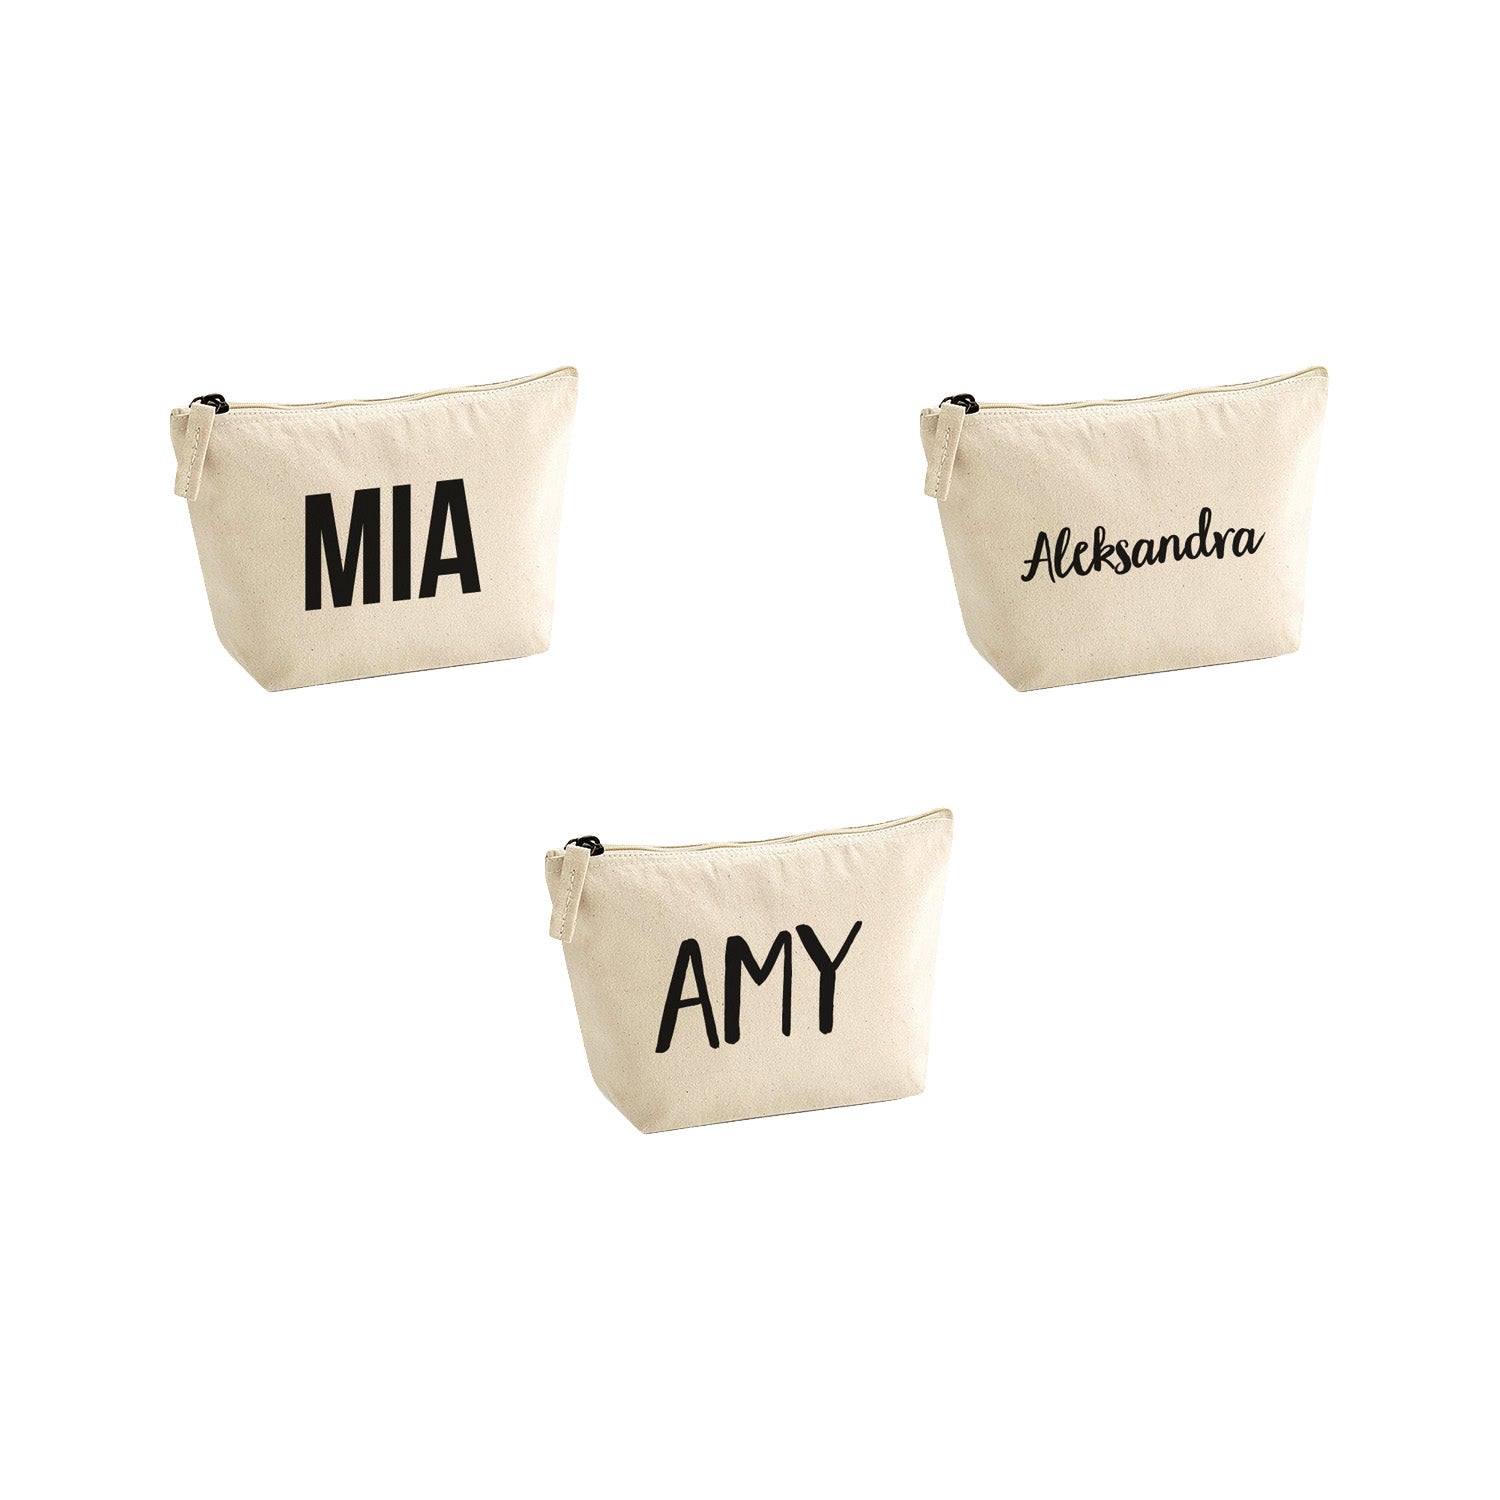 Small toiletry bag - With name